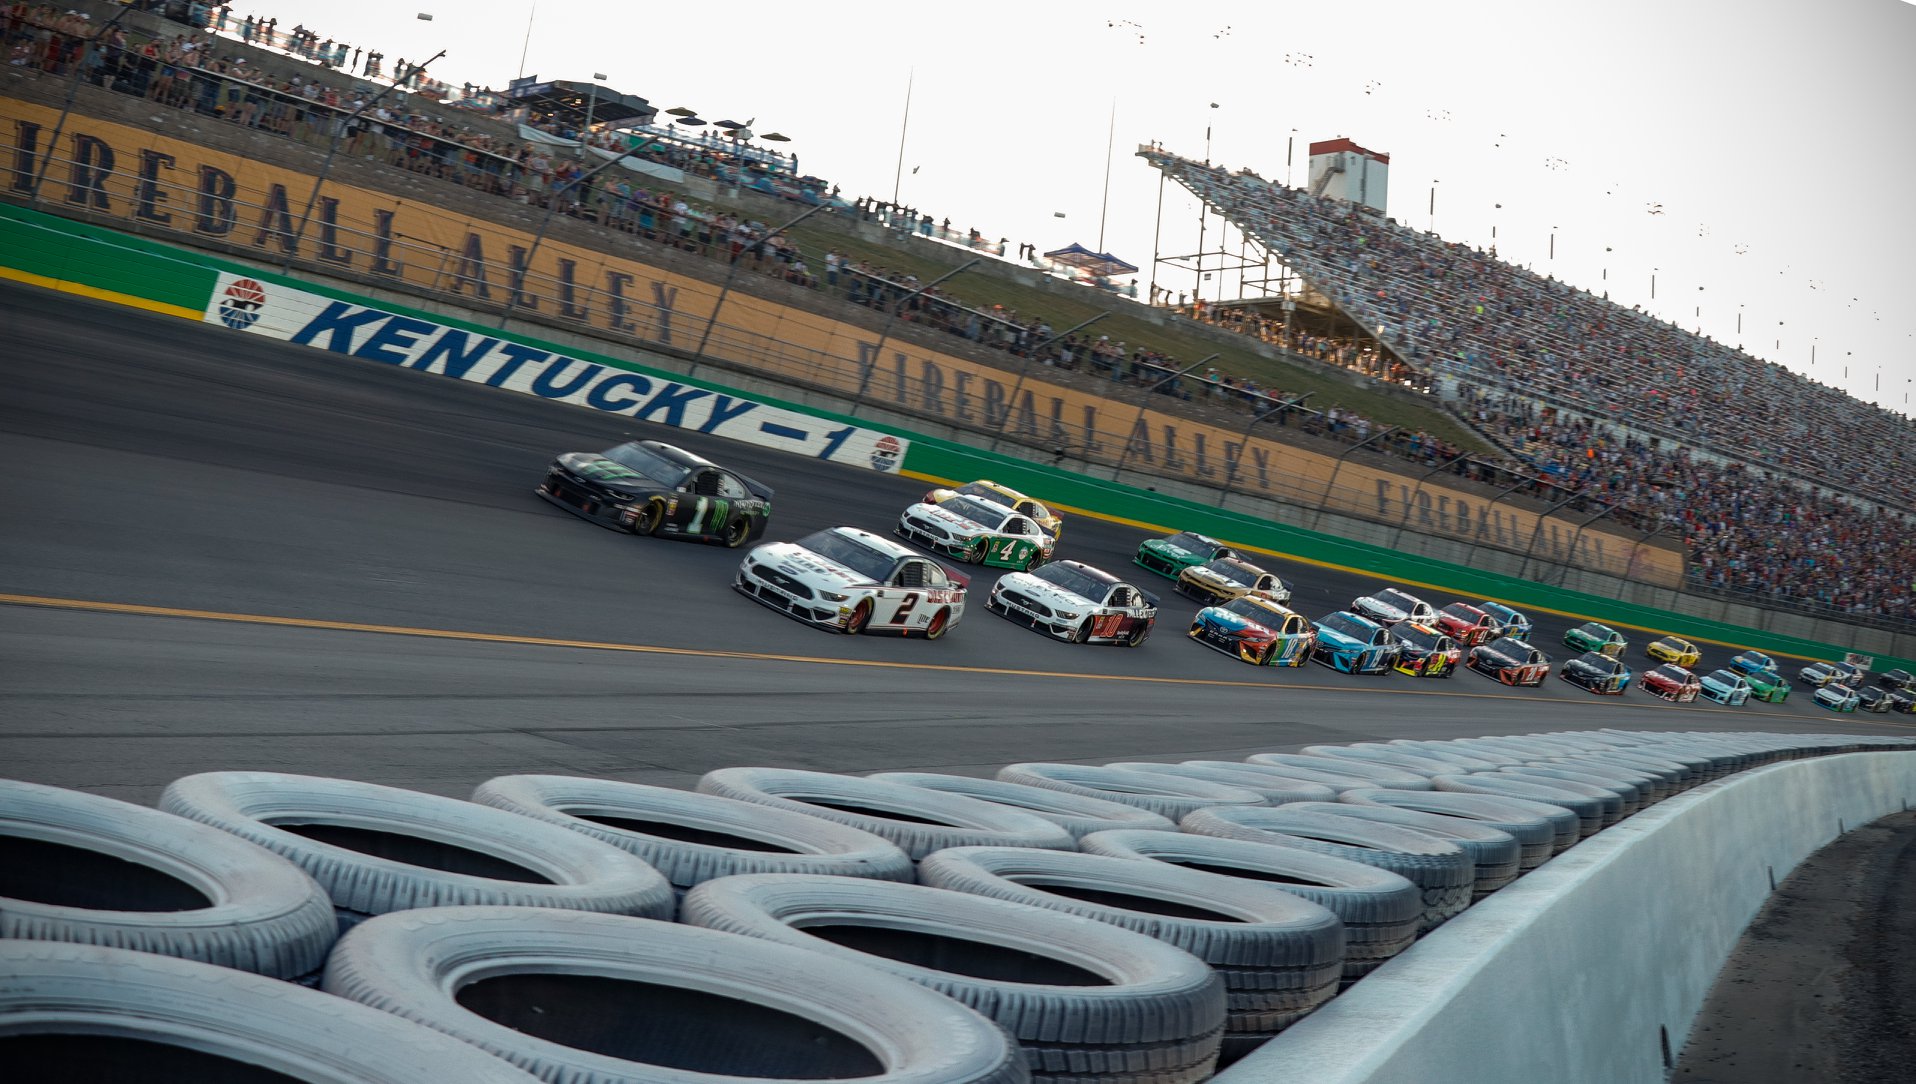 Without a doubt, today's Quaker State 400 may get dicey! (Photo Credit: Stephen Conley/TPF)